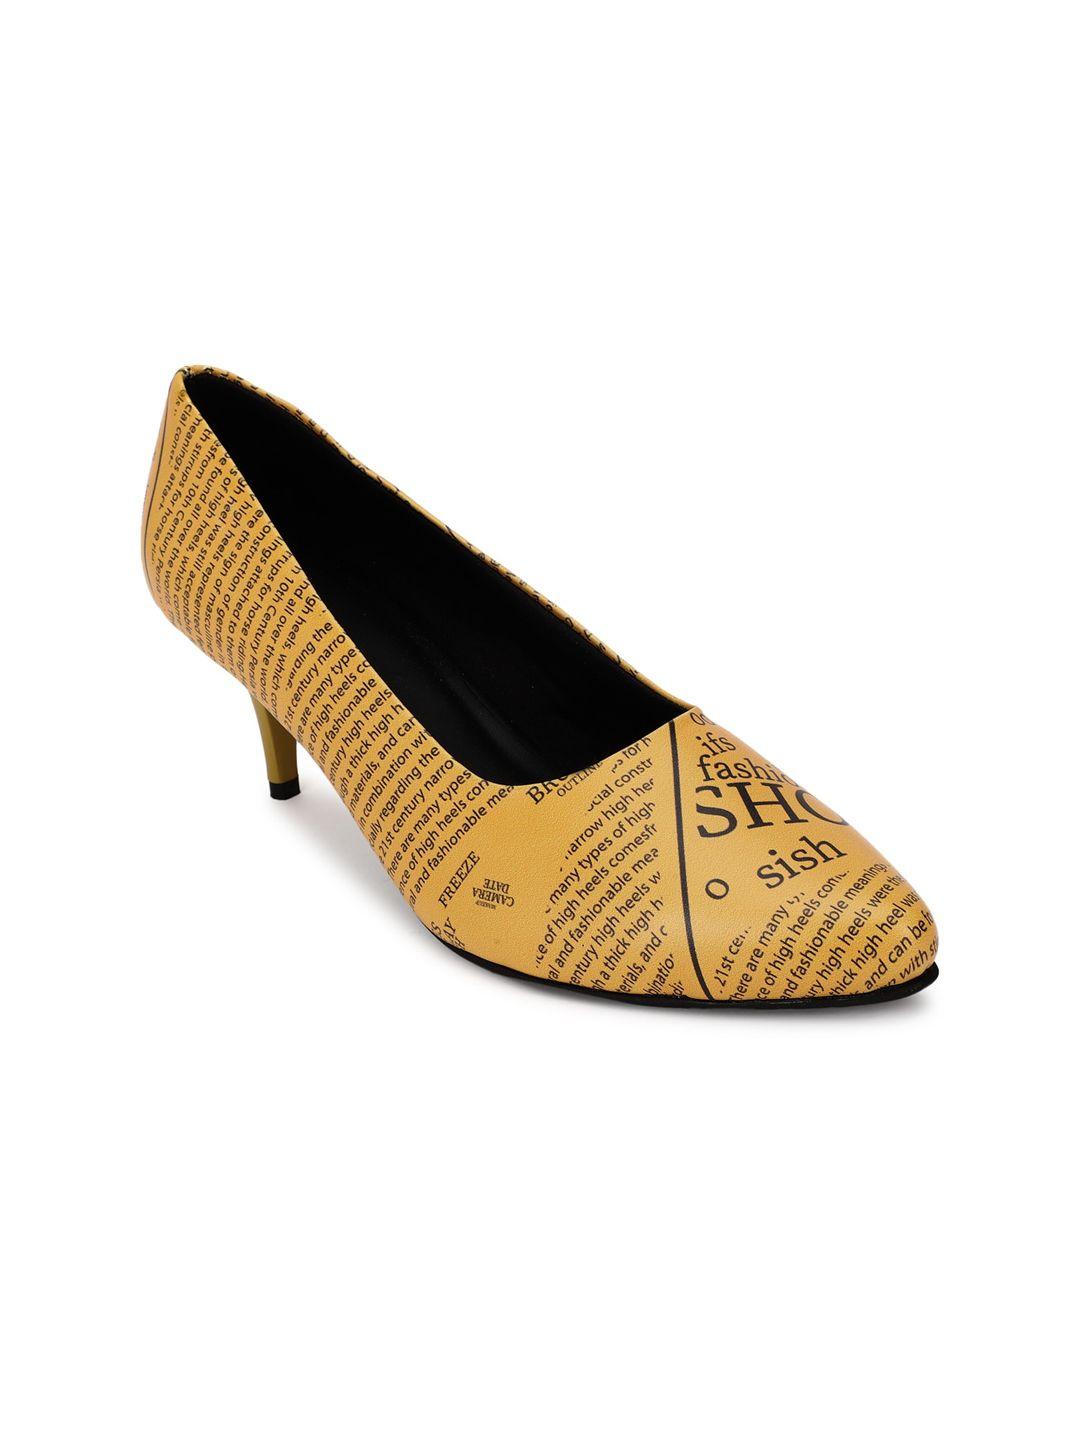 forever-21-yellow-printed-pu-kitten-pumps